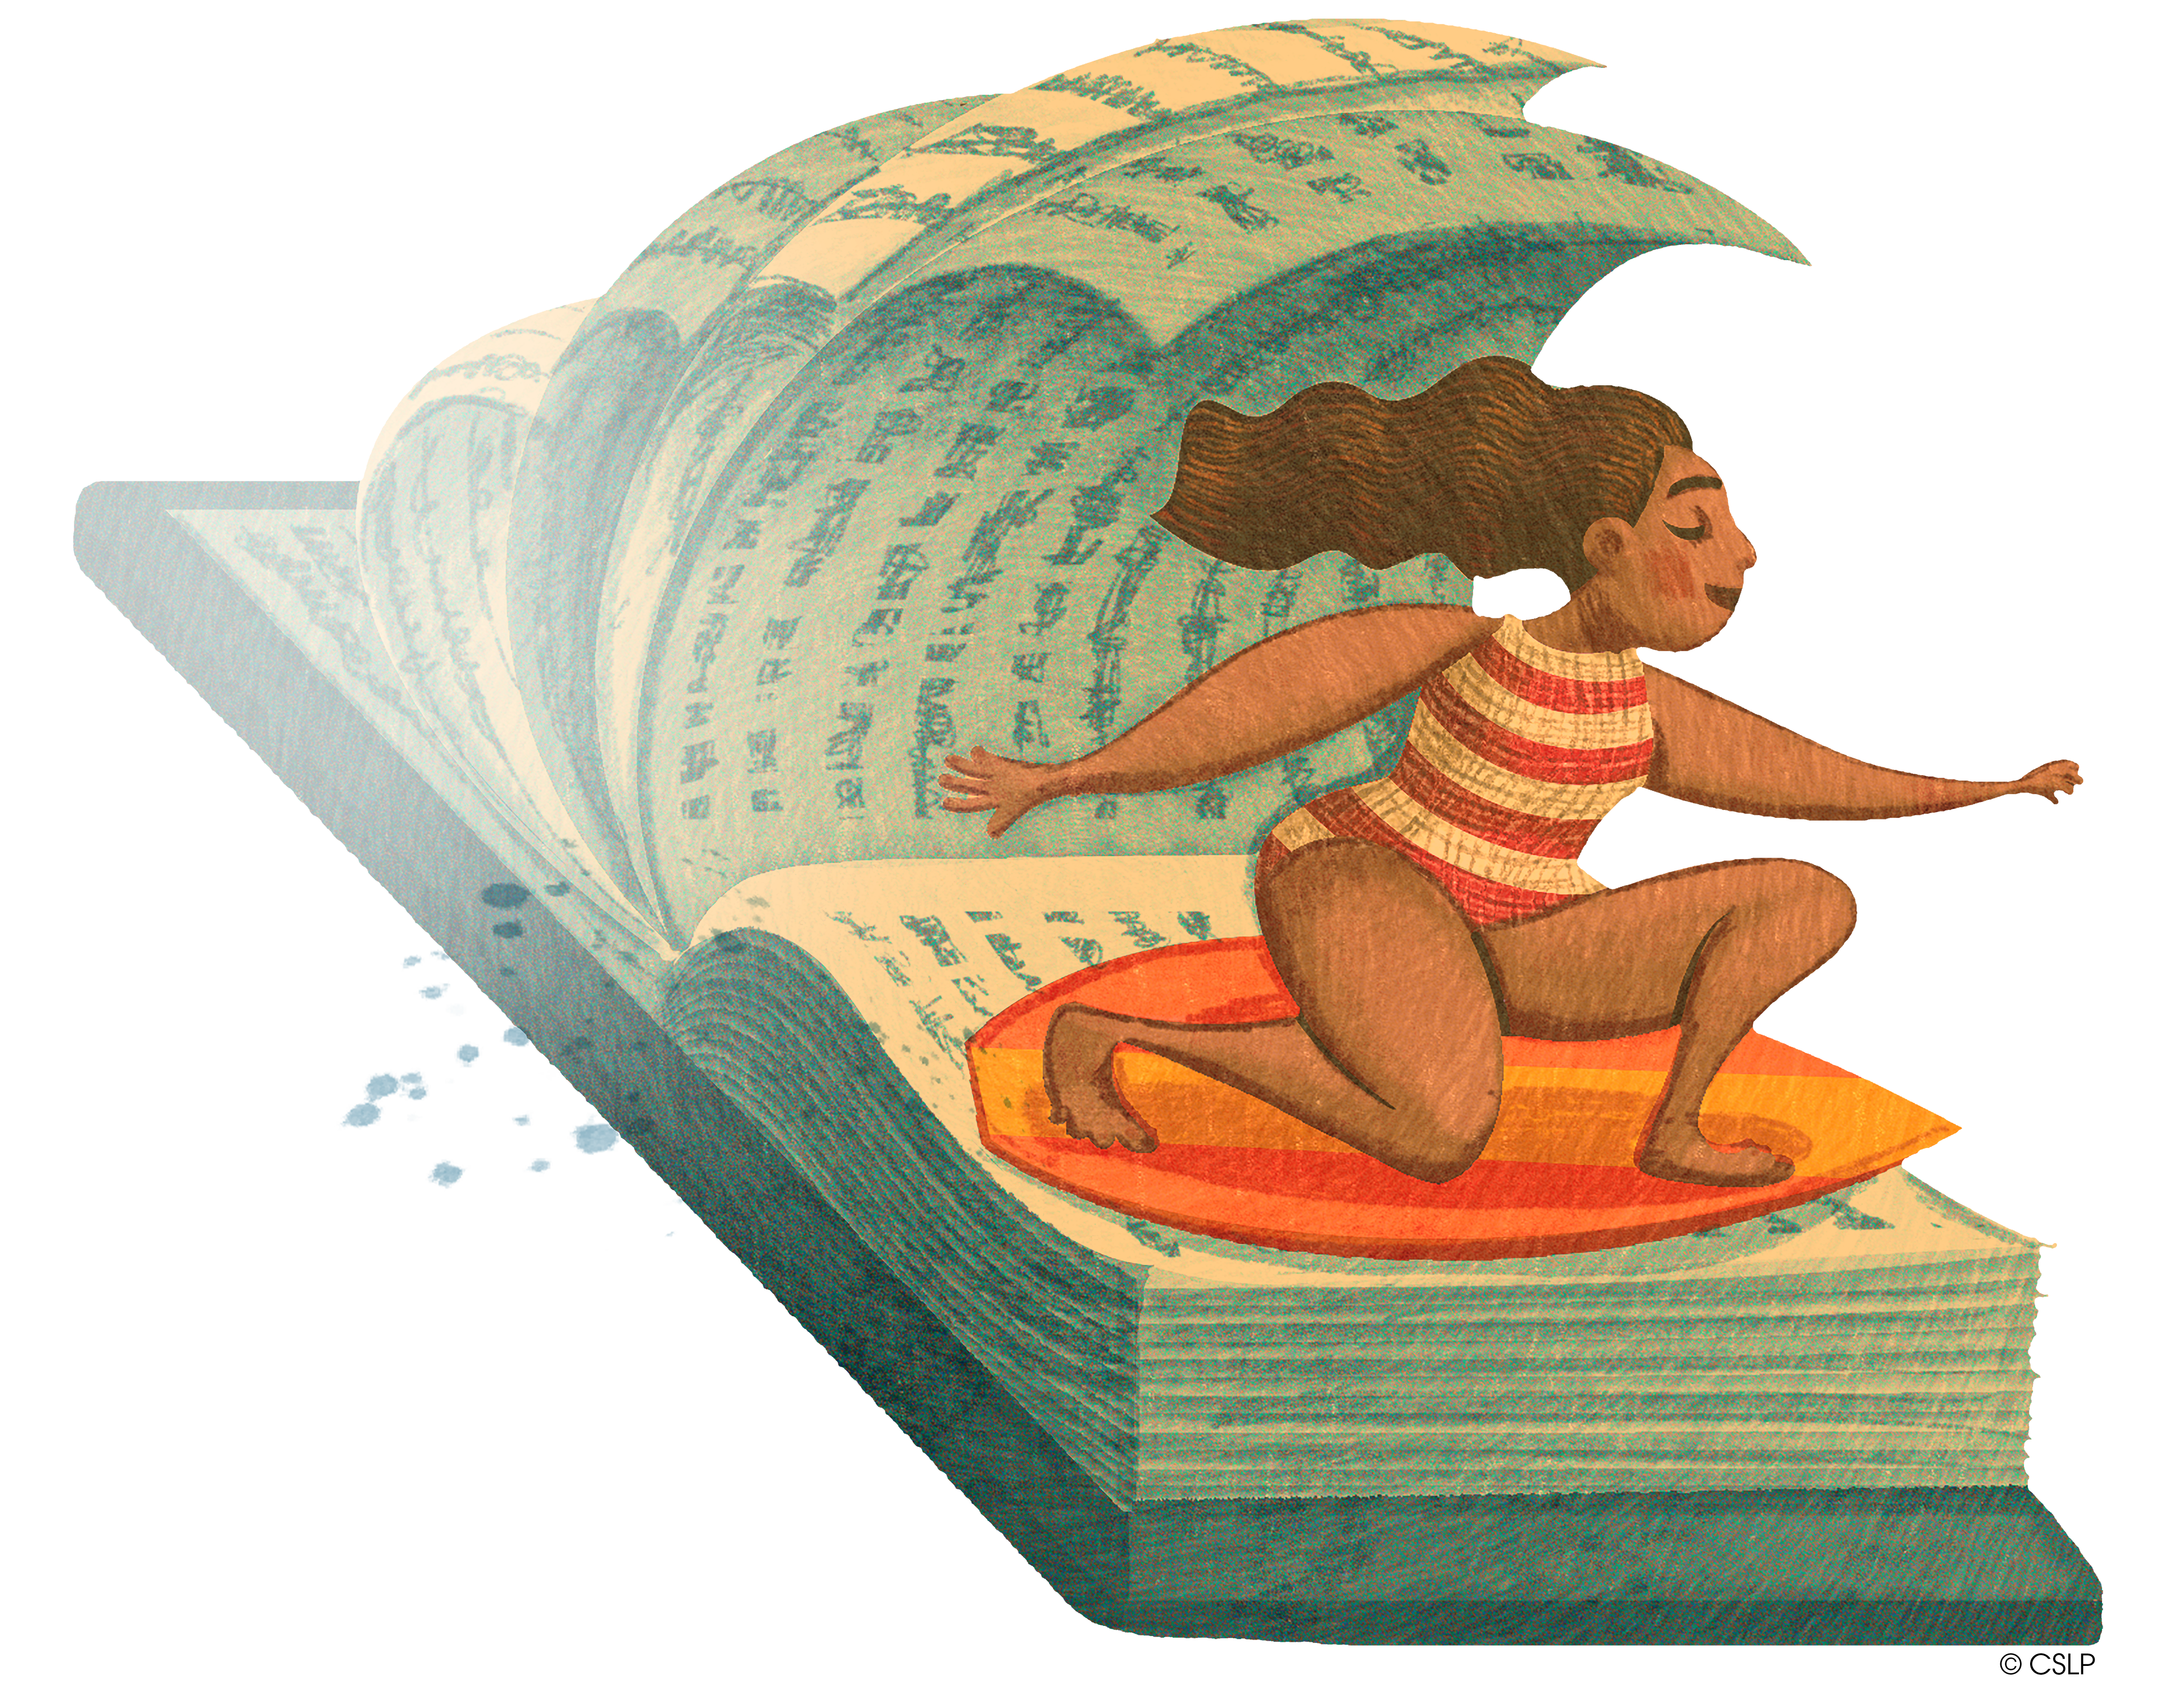 A girl surfs on a wave made of the pages of a book.